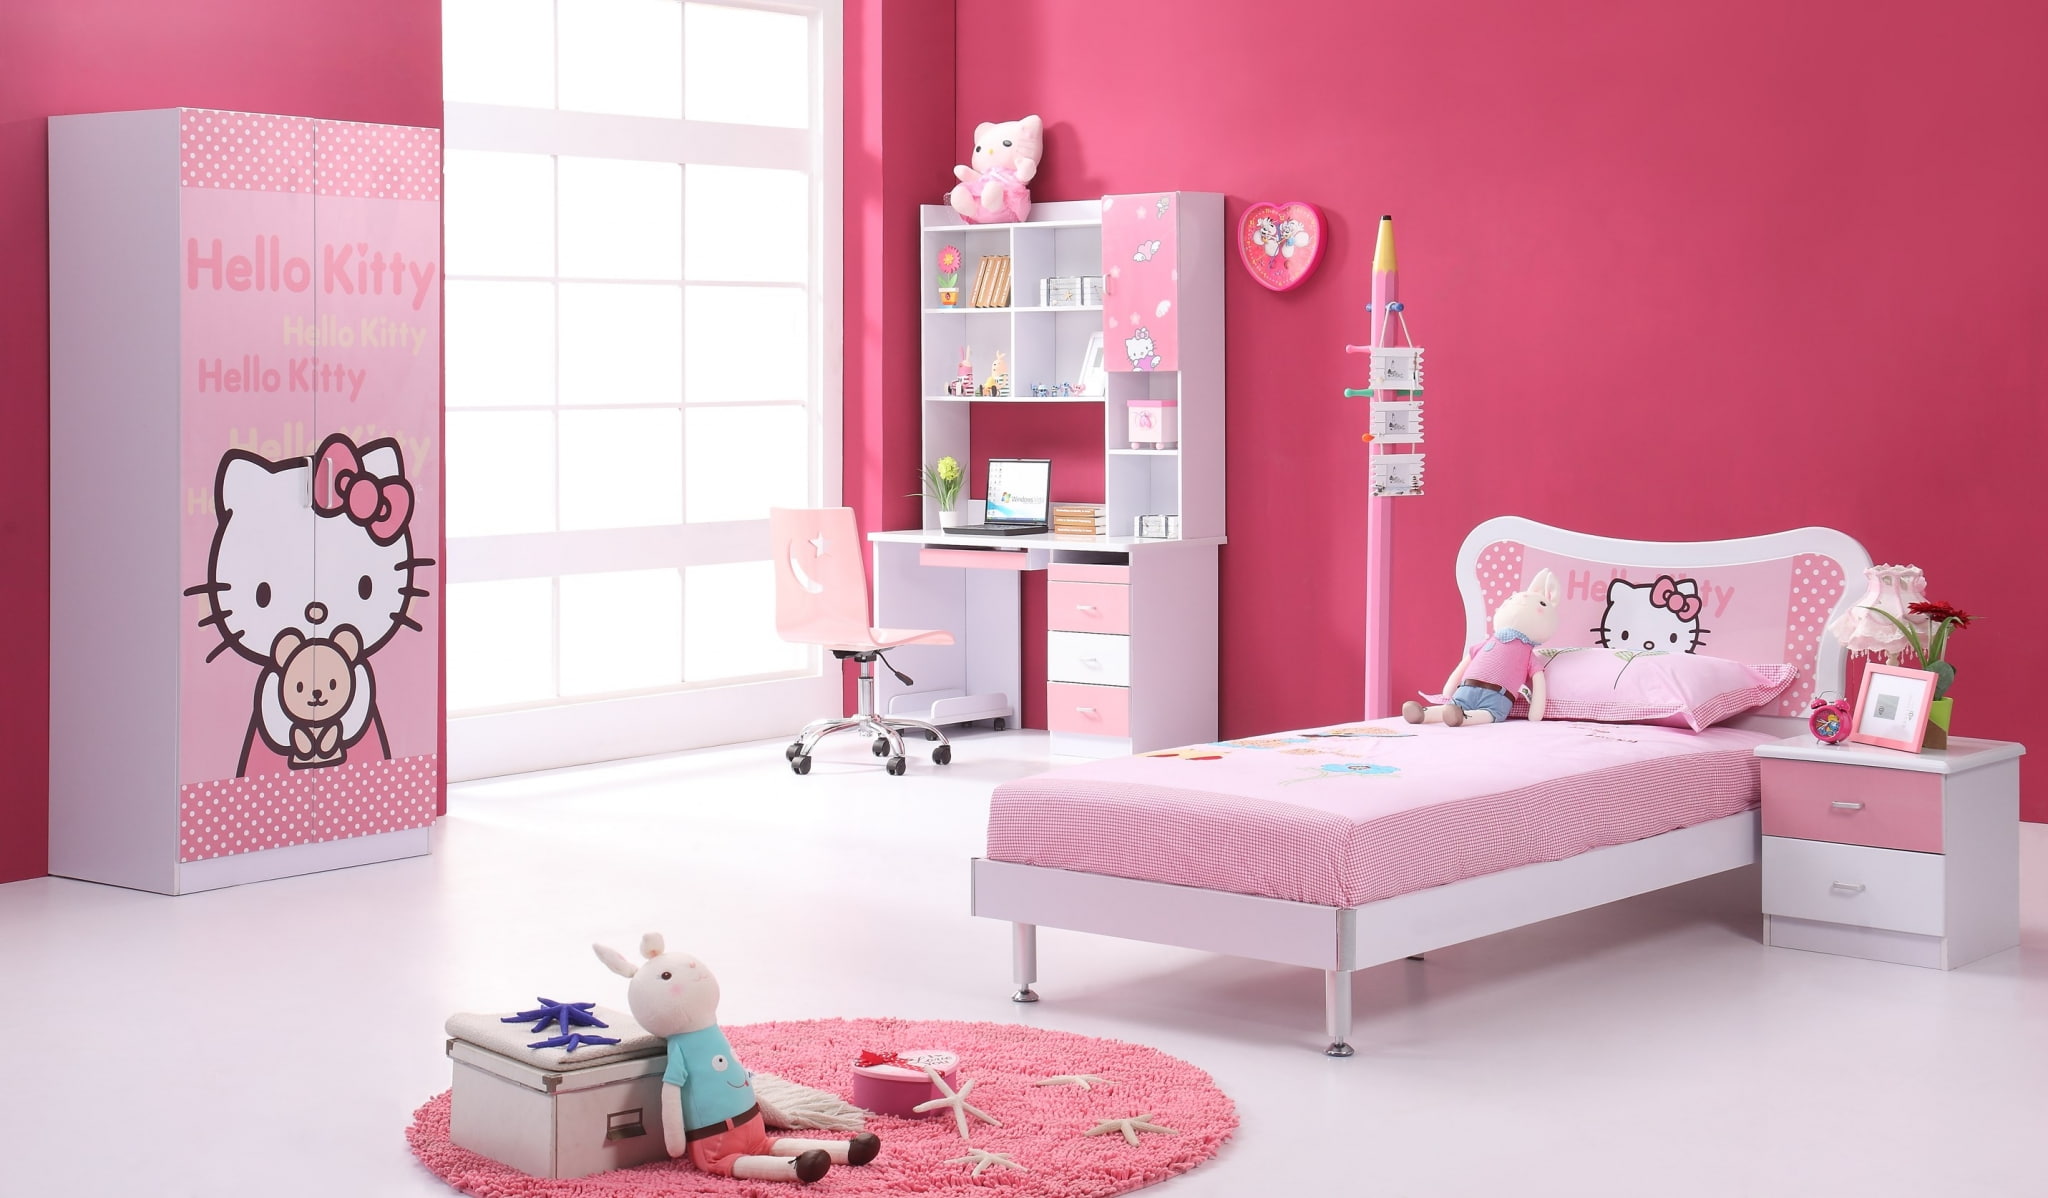 hello kitty amazing pictures, pink color, furniture, indoors